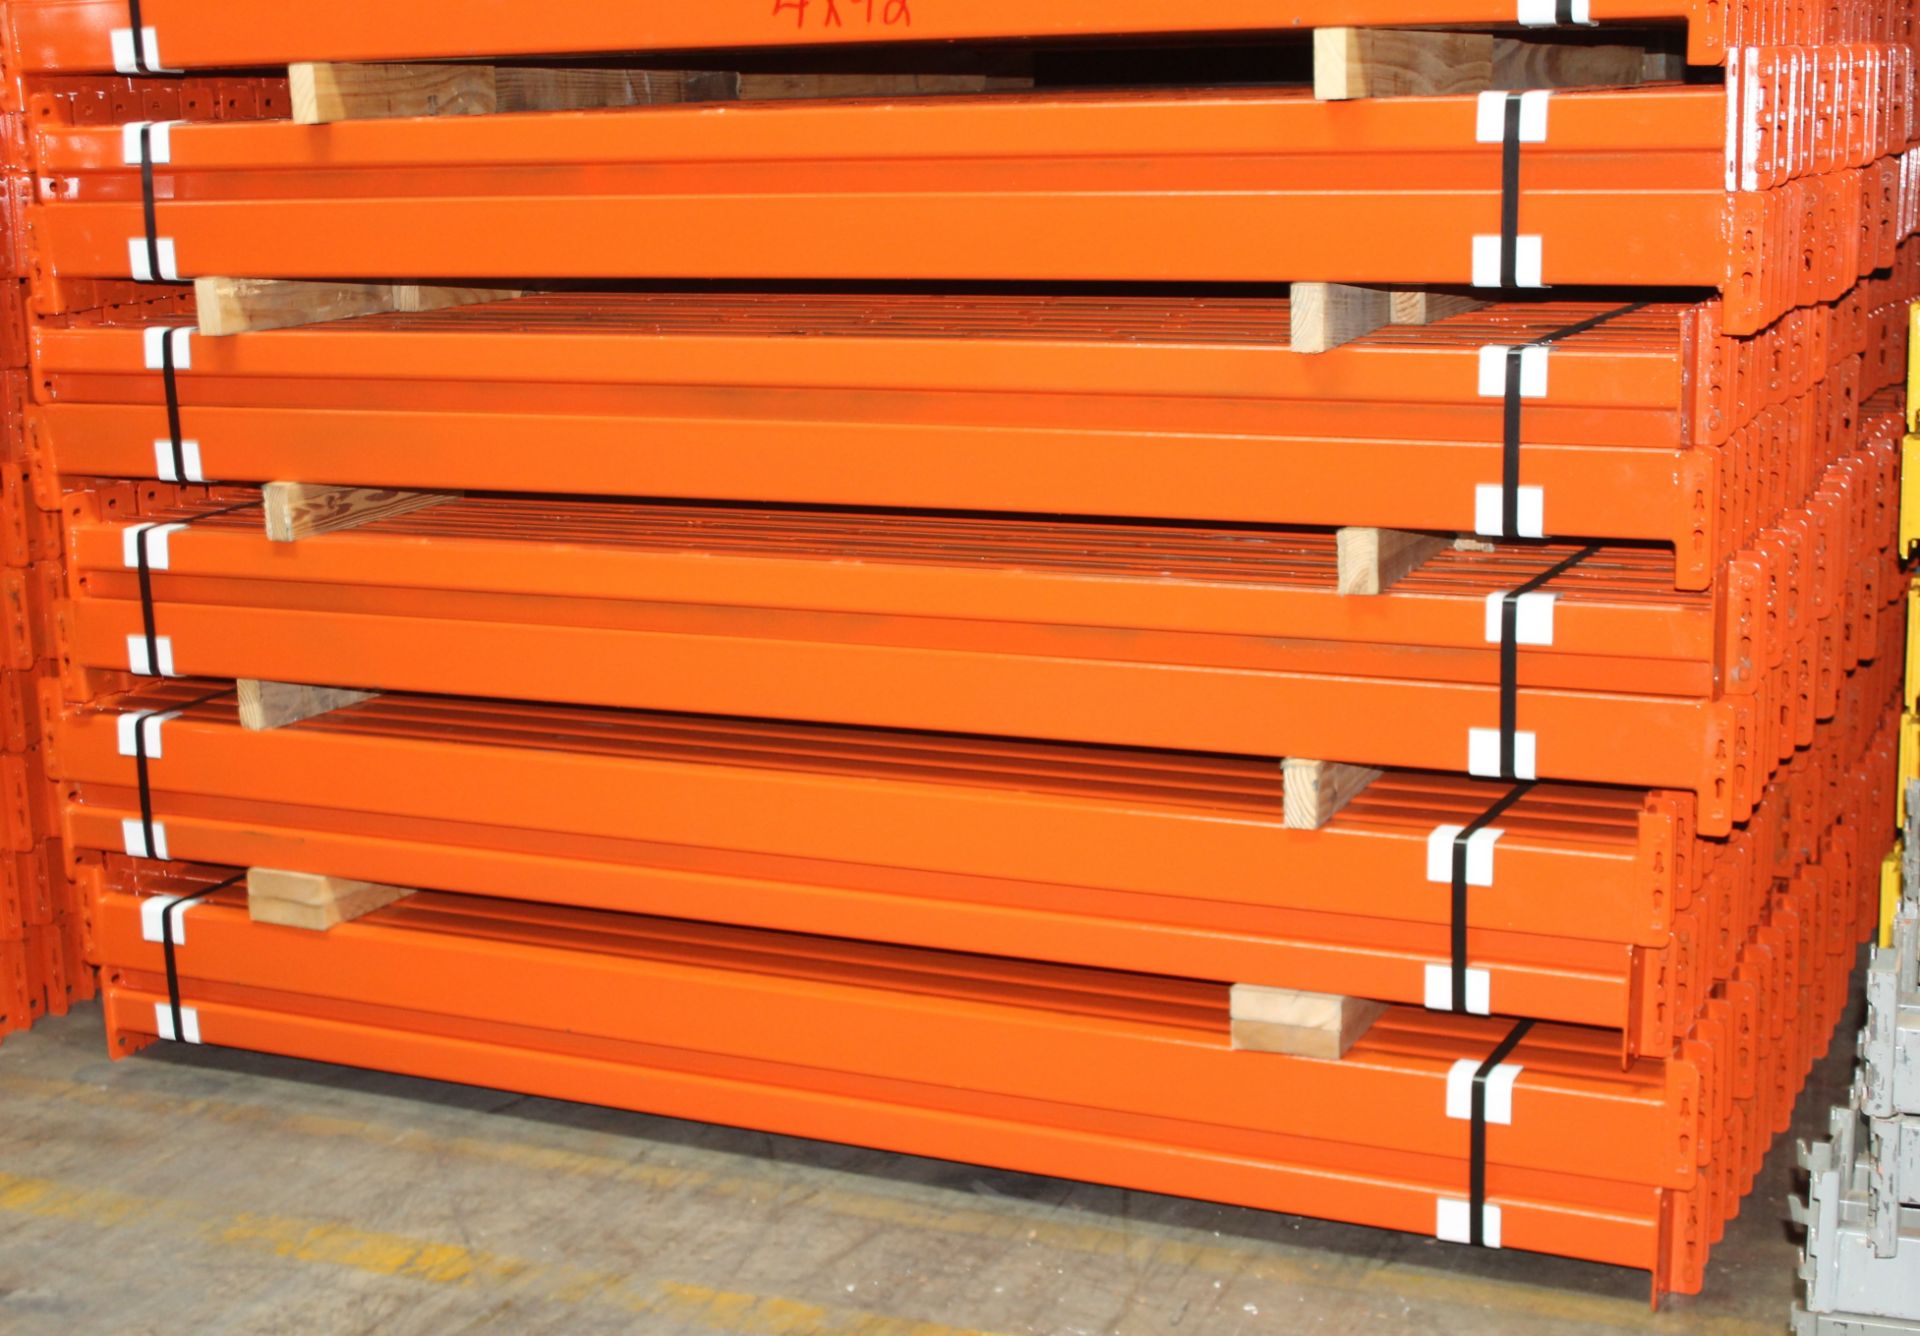 14 BAYS OF TEARDROP STYLE PALLET RACK, LIKE NEW, SIZE: 16'H x 42"D X 8'W - Image 3 of 5